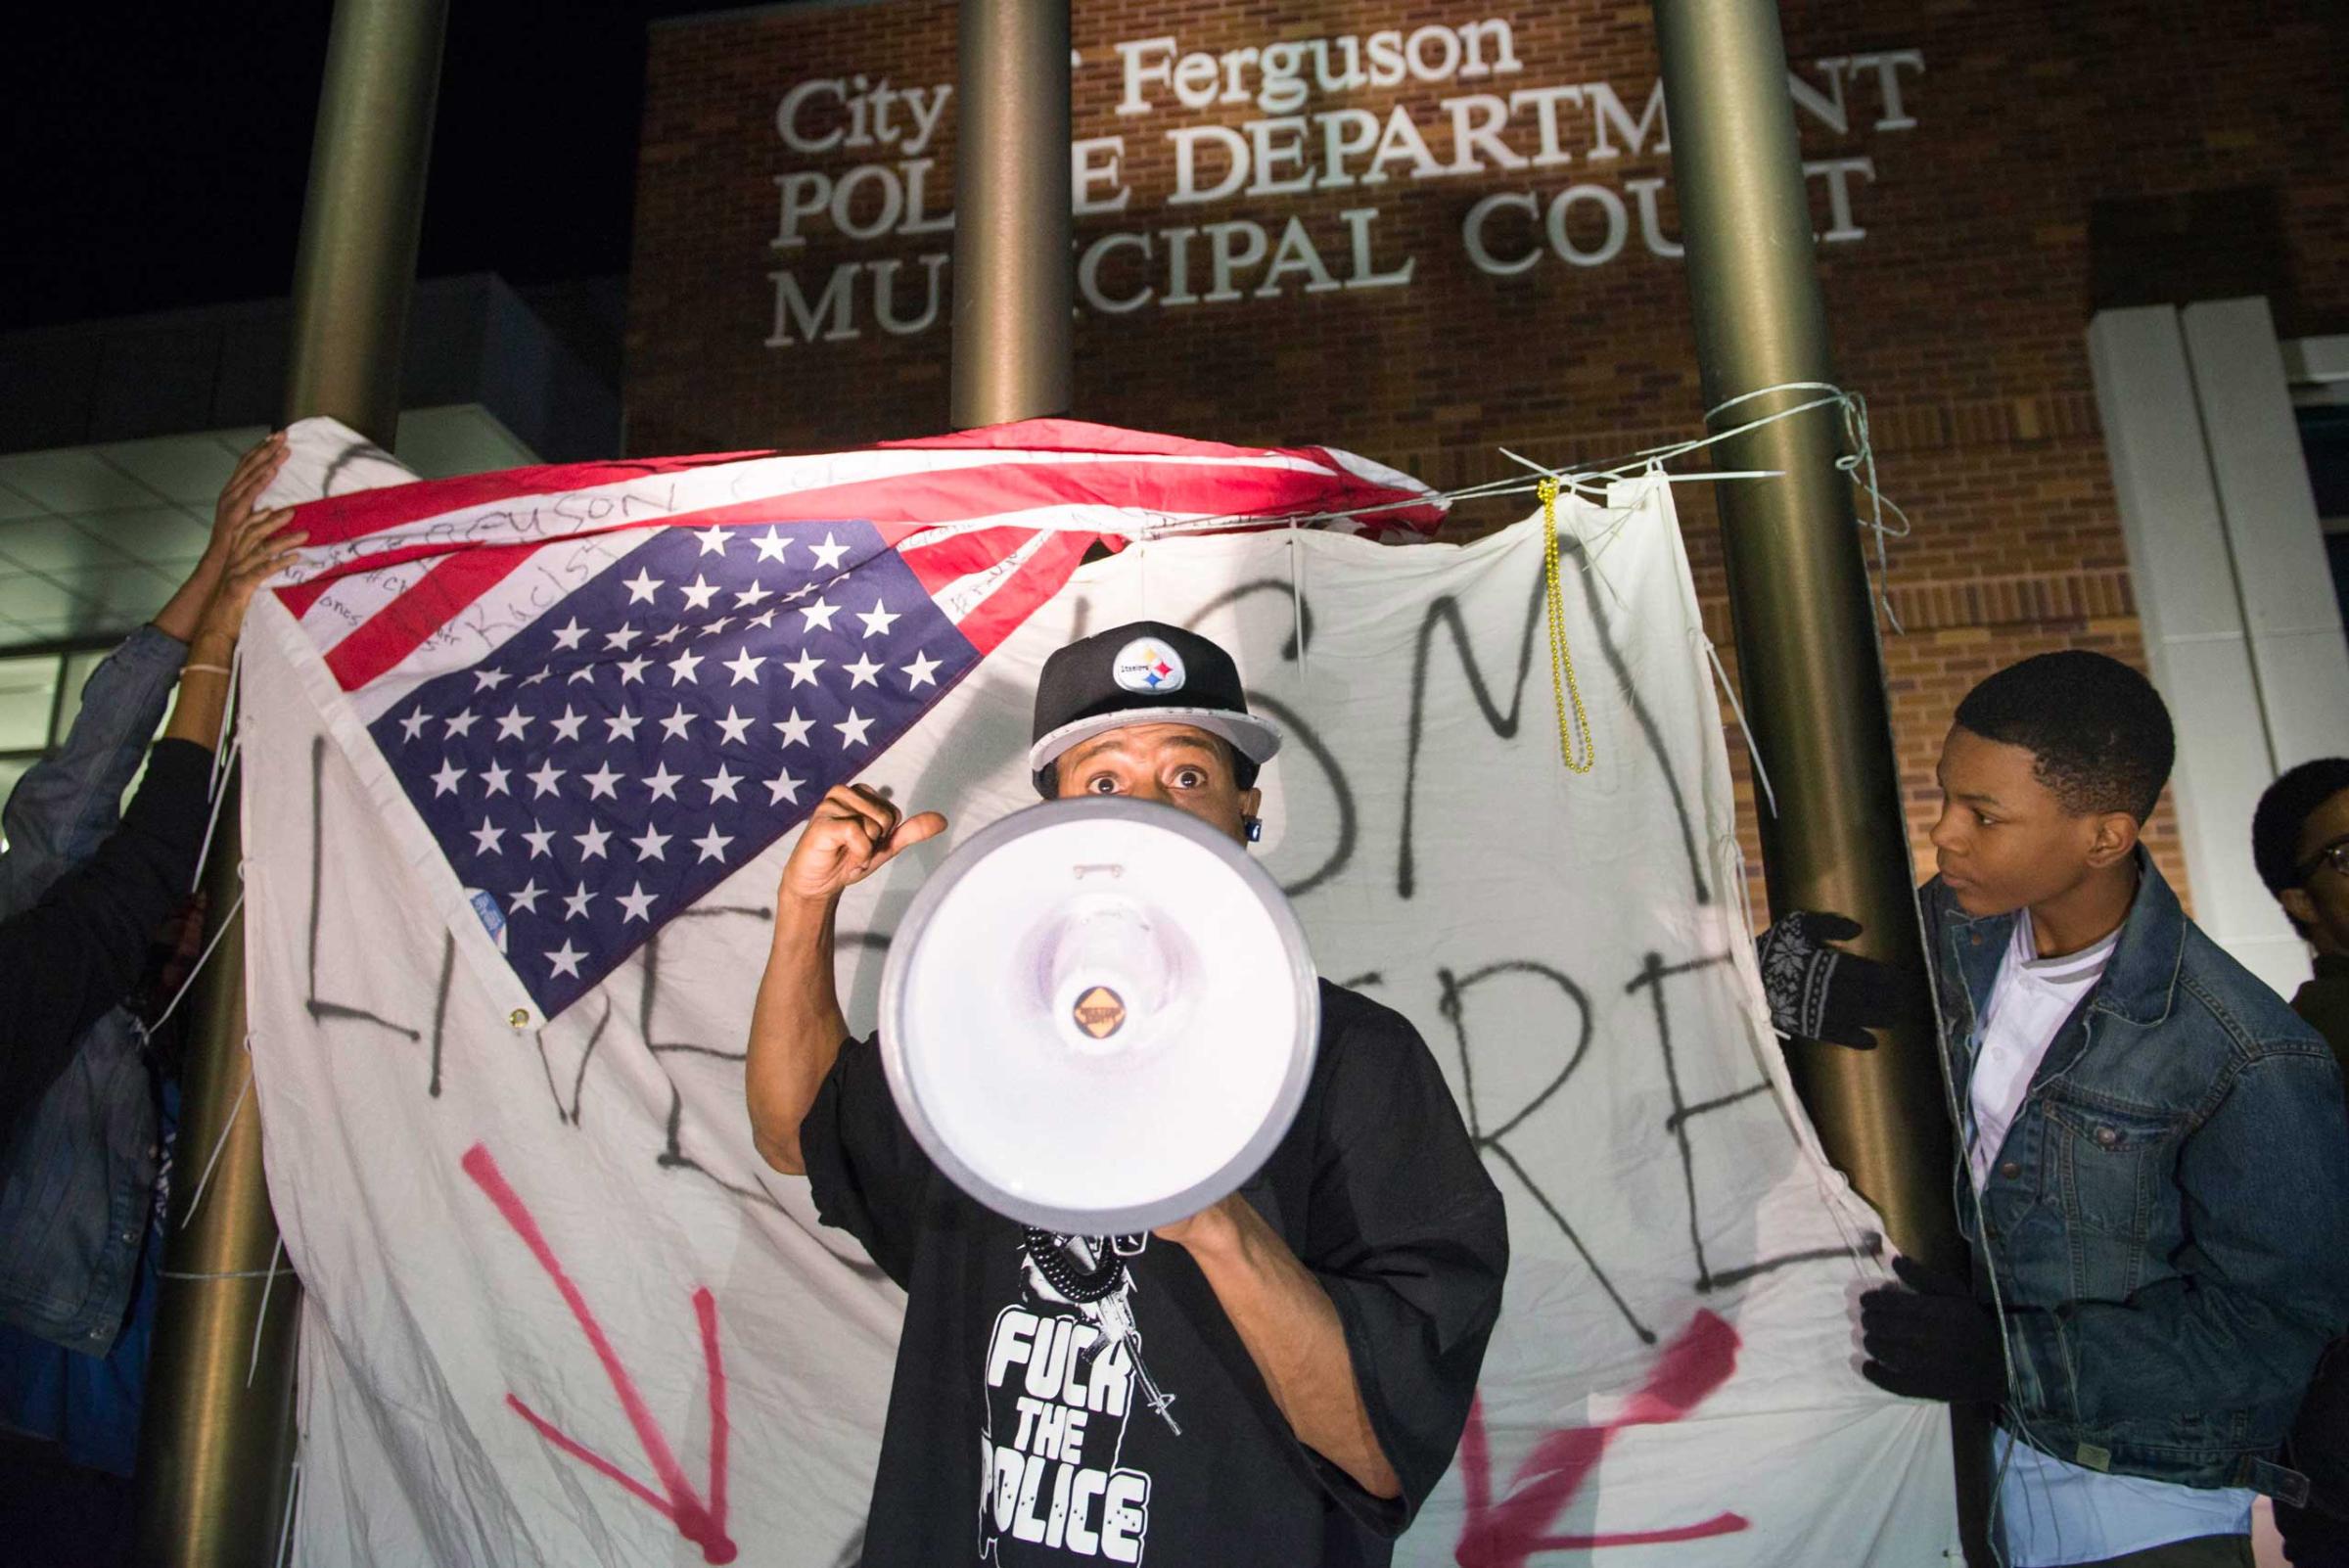 A protester chants in front of a flag which reads, "Racism lives here", outside the City of Ferguson Police Department and Municipal Court in Ferguson, March 11, 2015.